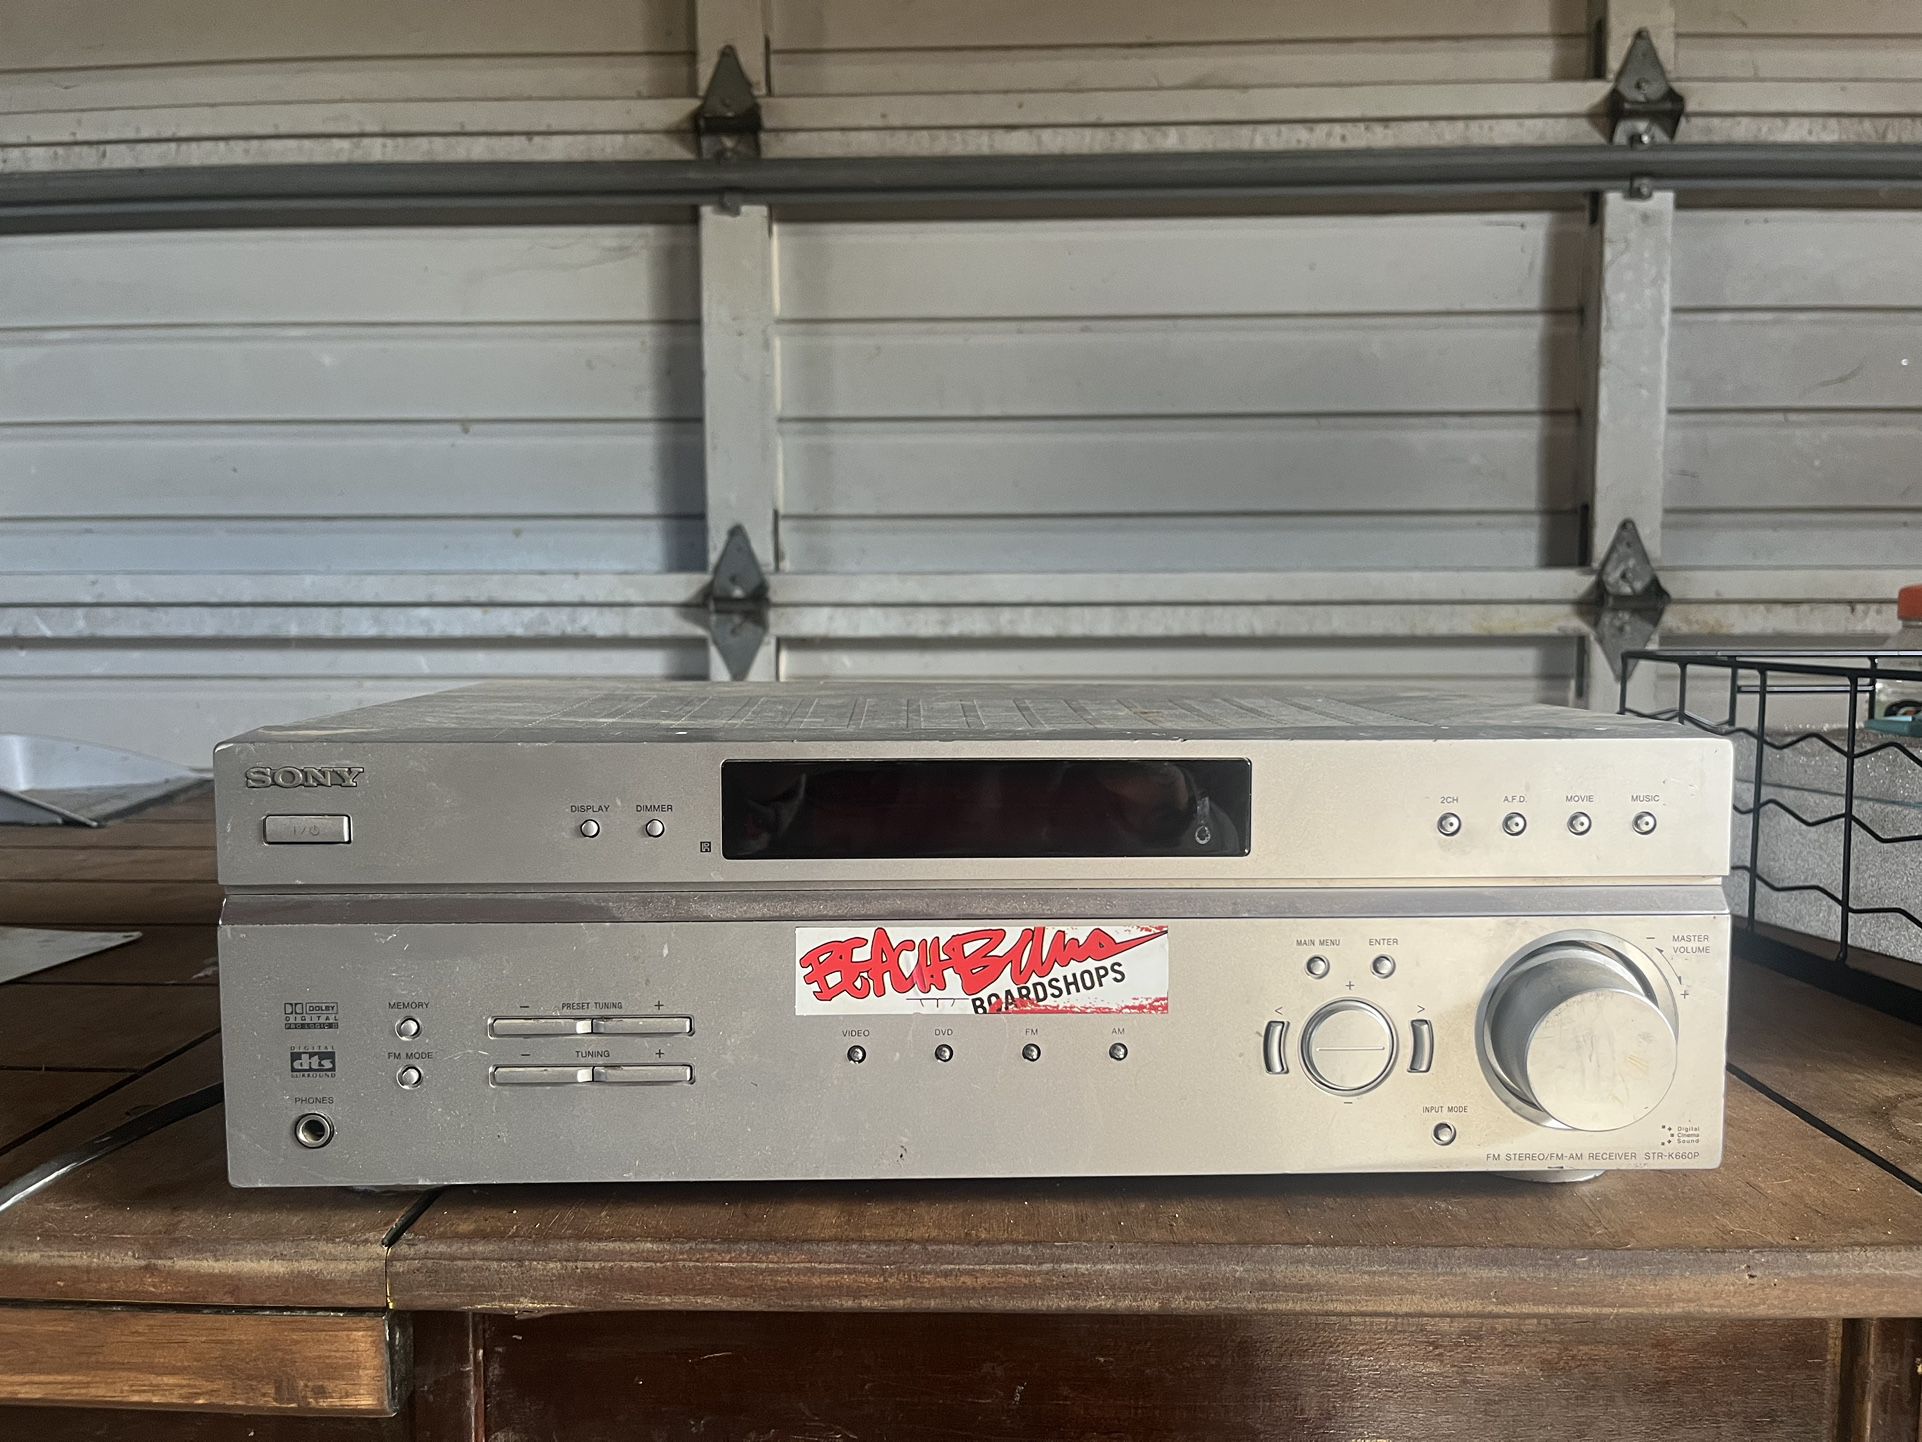 Sony Stereo/Fm-Am Receiver 